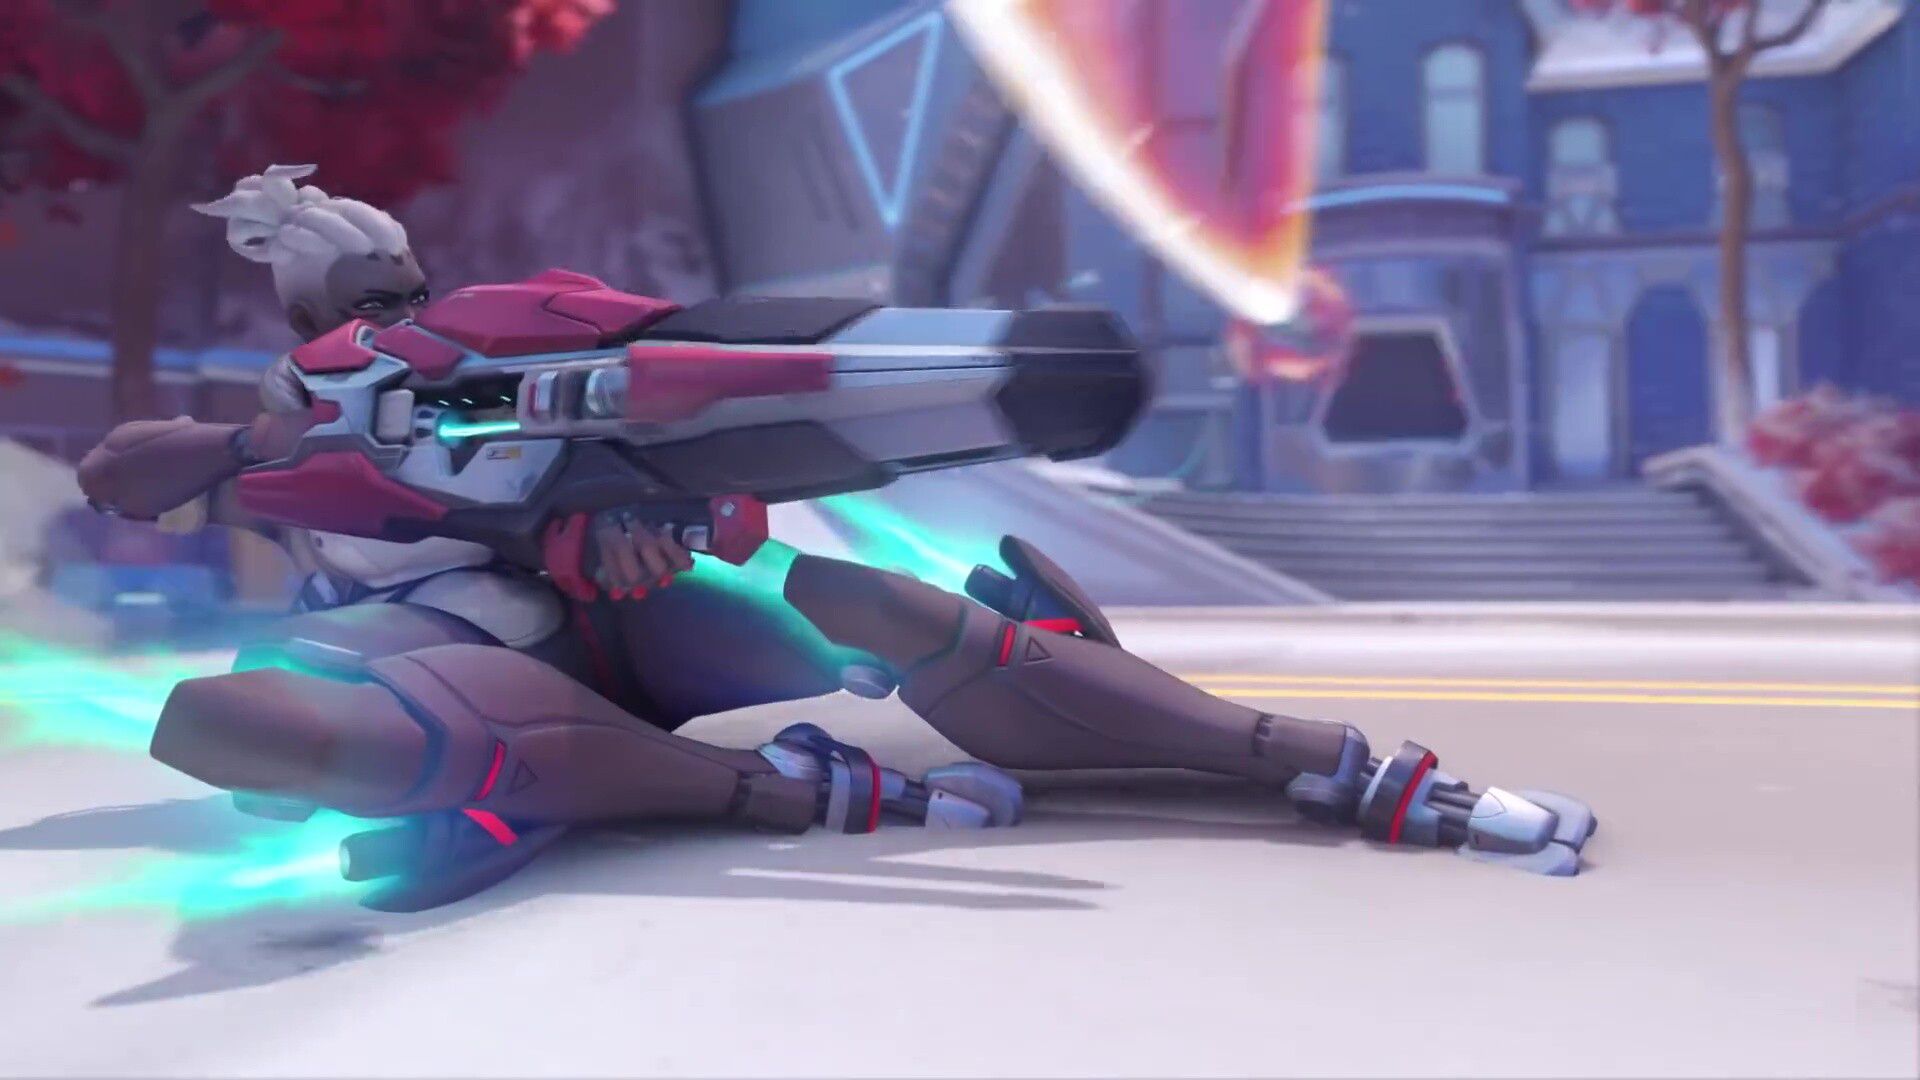 "Sojoan", a new character with a powerful rocket-equipped thigh with a whip whip of the Overwatch 2 machine 4